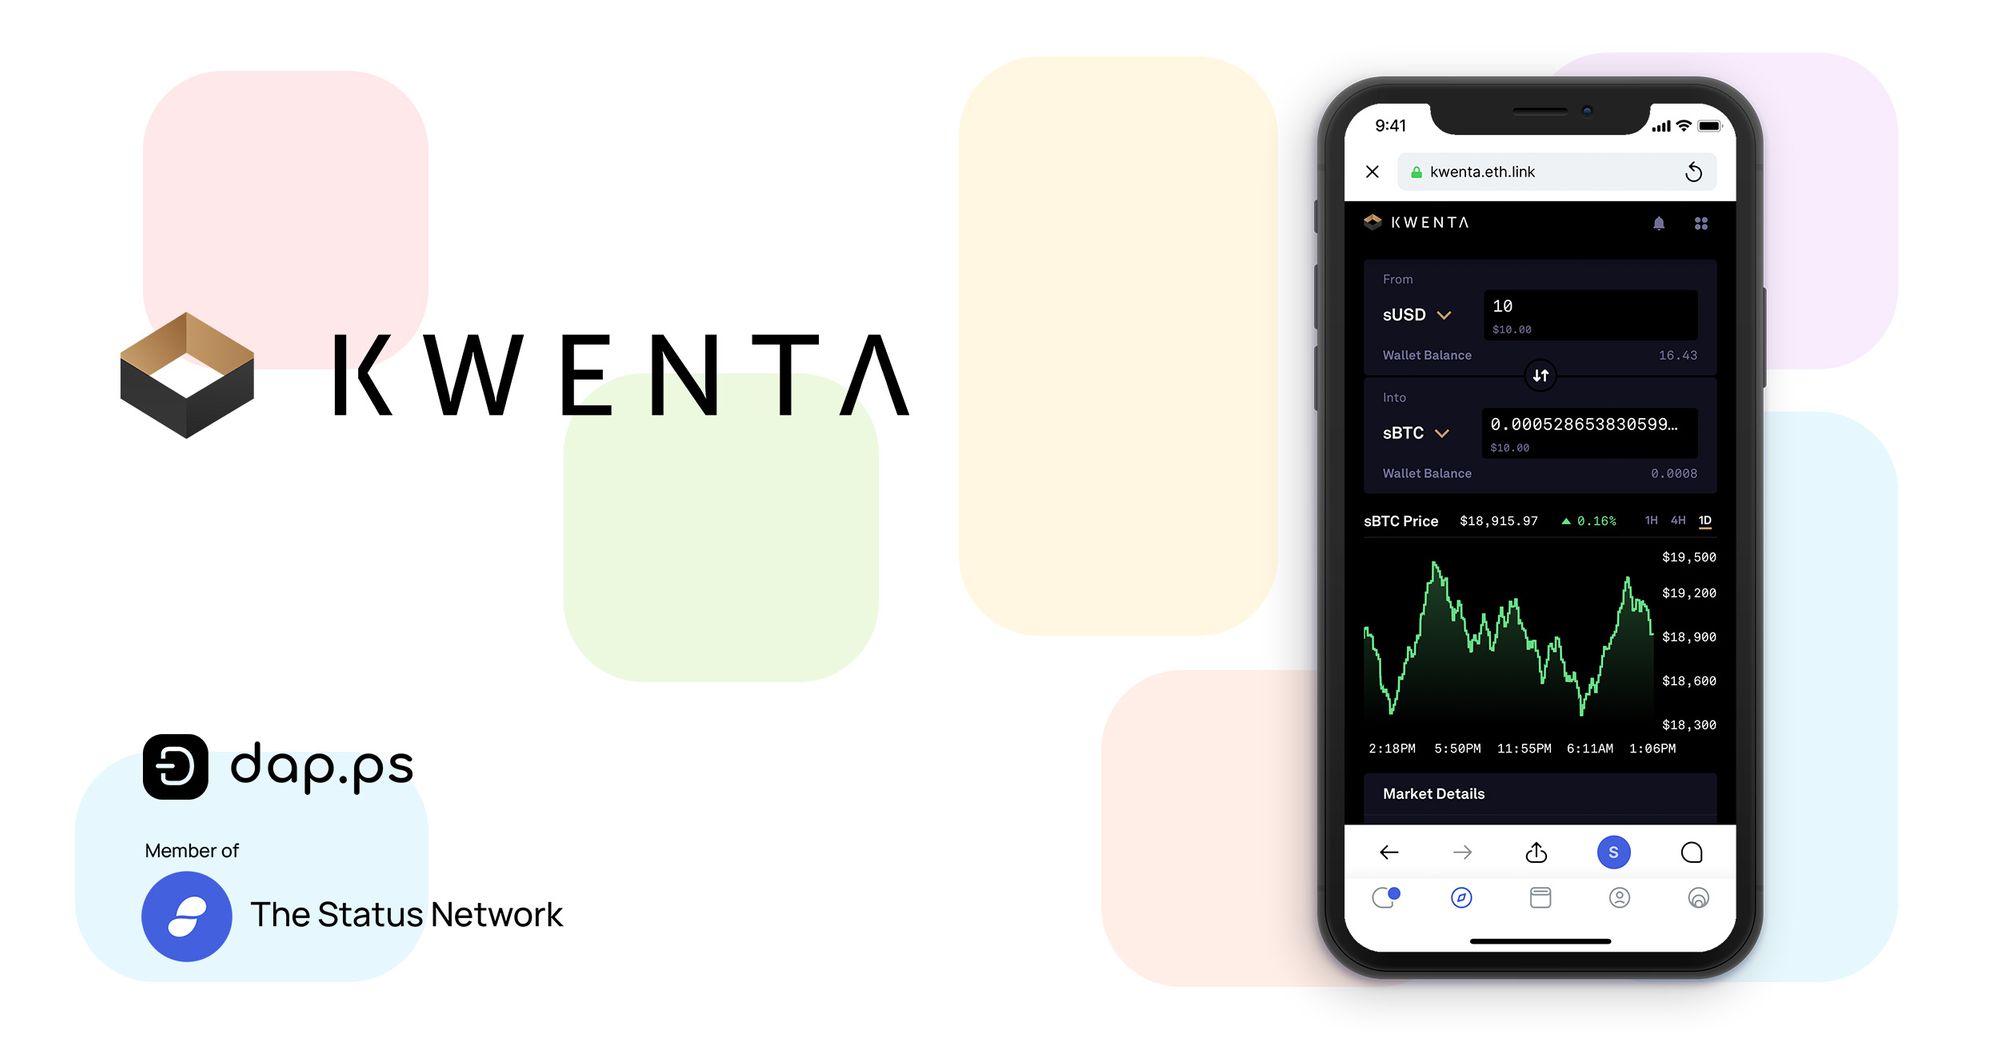 Kwenta - powered by the Synthetix Protocol - is live in Dap.ps